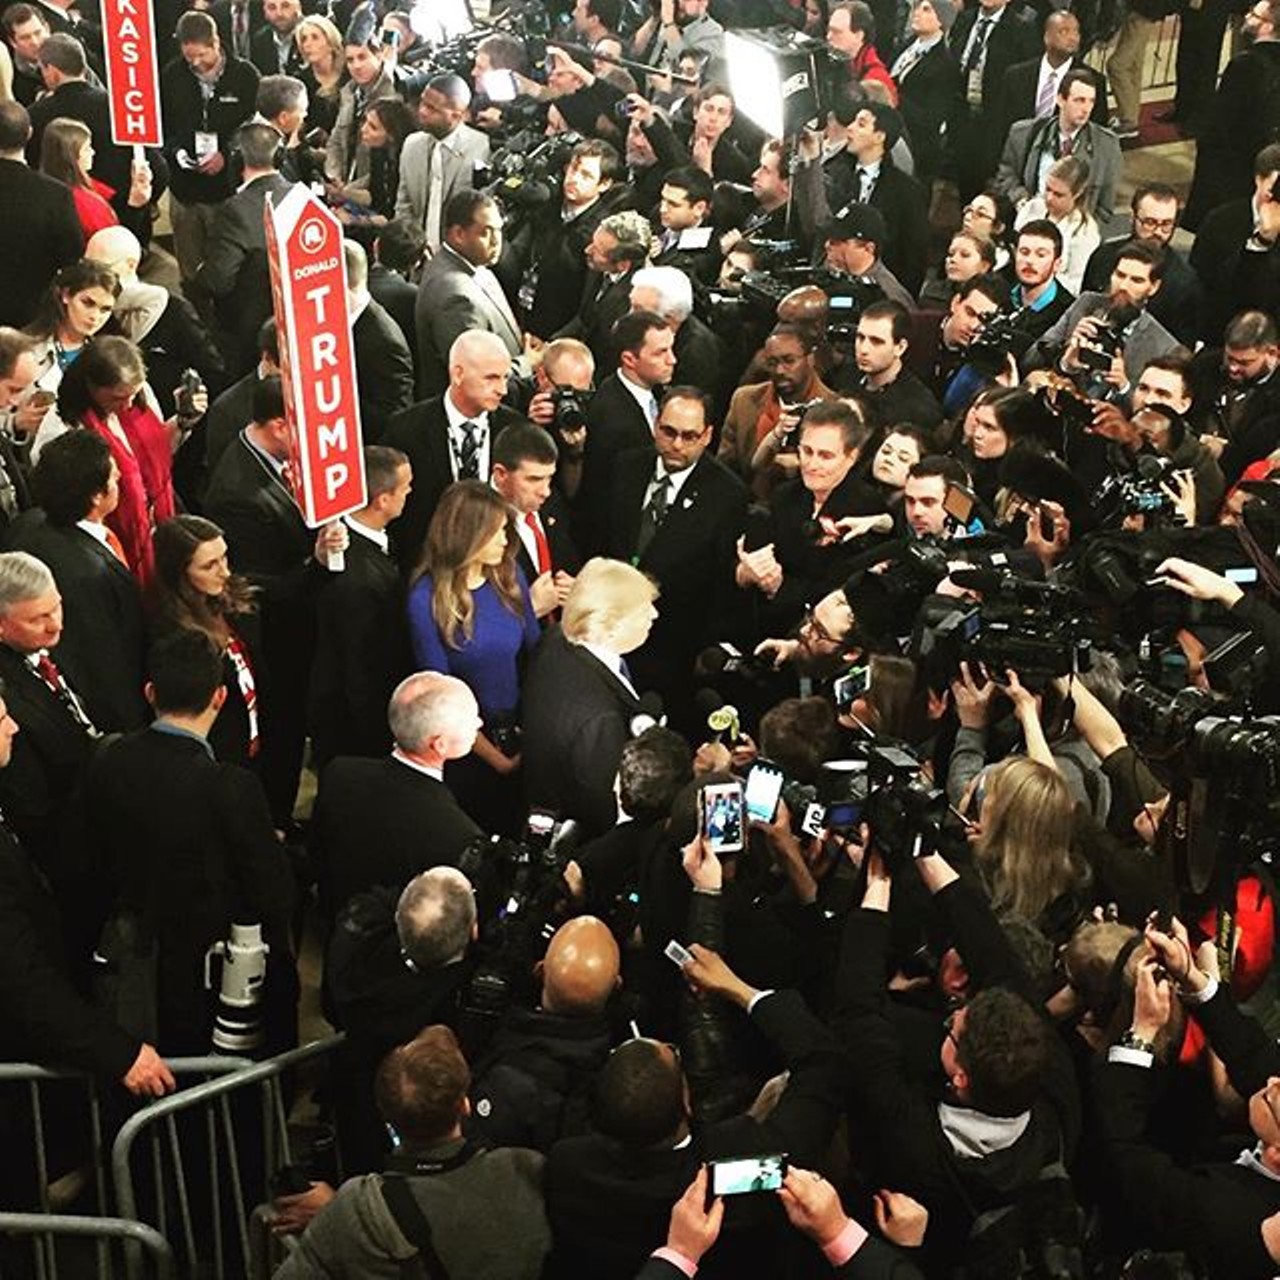 After the debate, reporters swarmed around Donald Trump for one last picture or comment from the bombastic candidate. Photo via Instagram user @ShannonBream